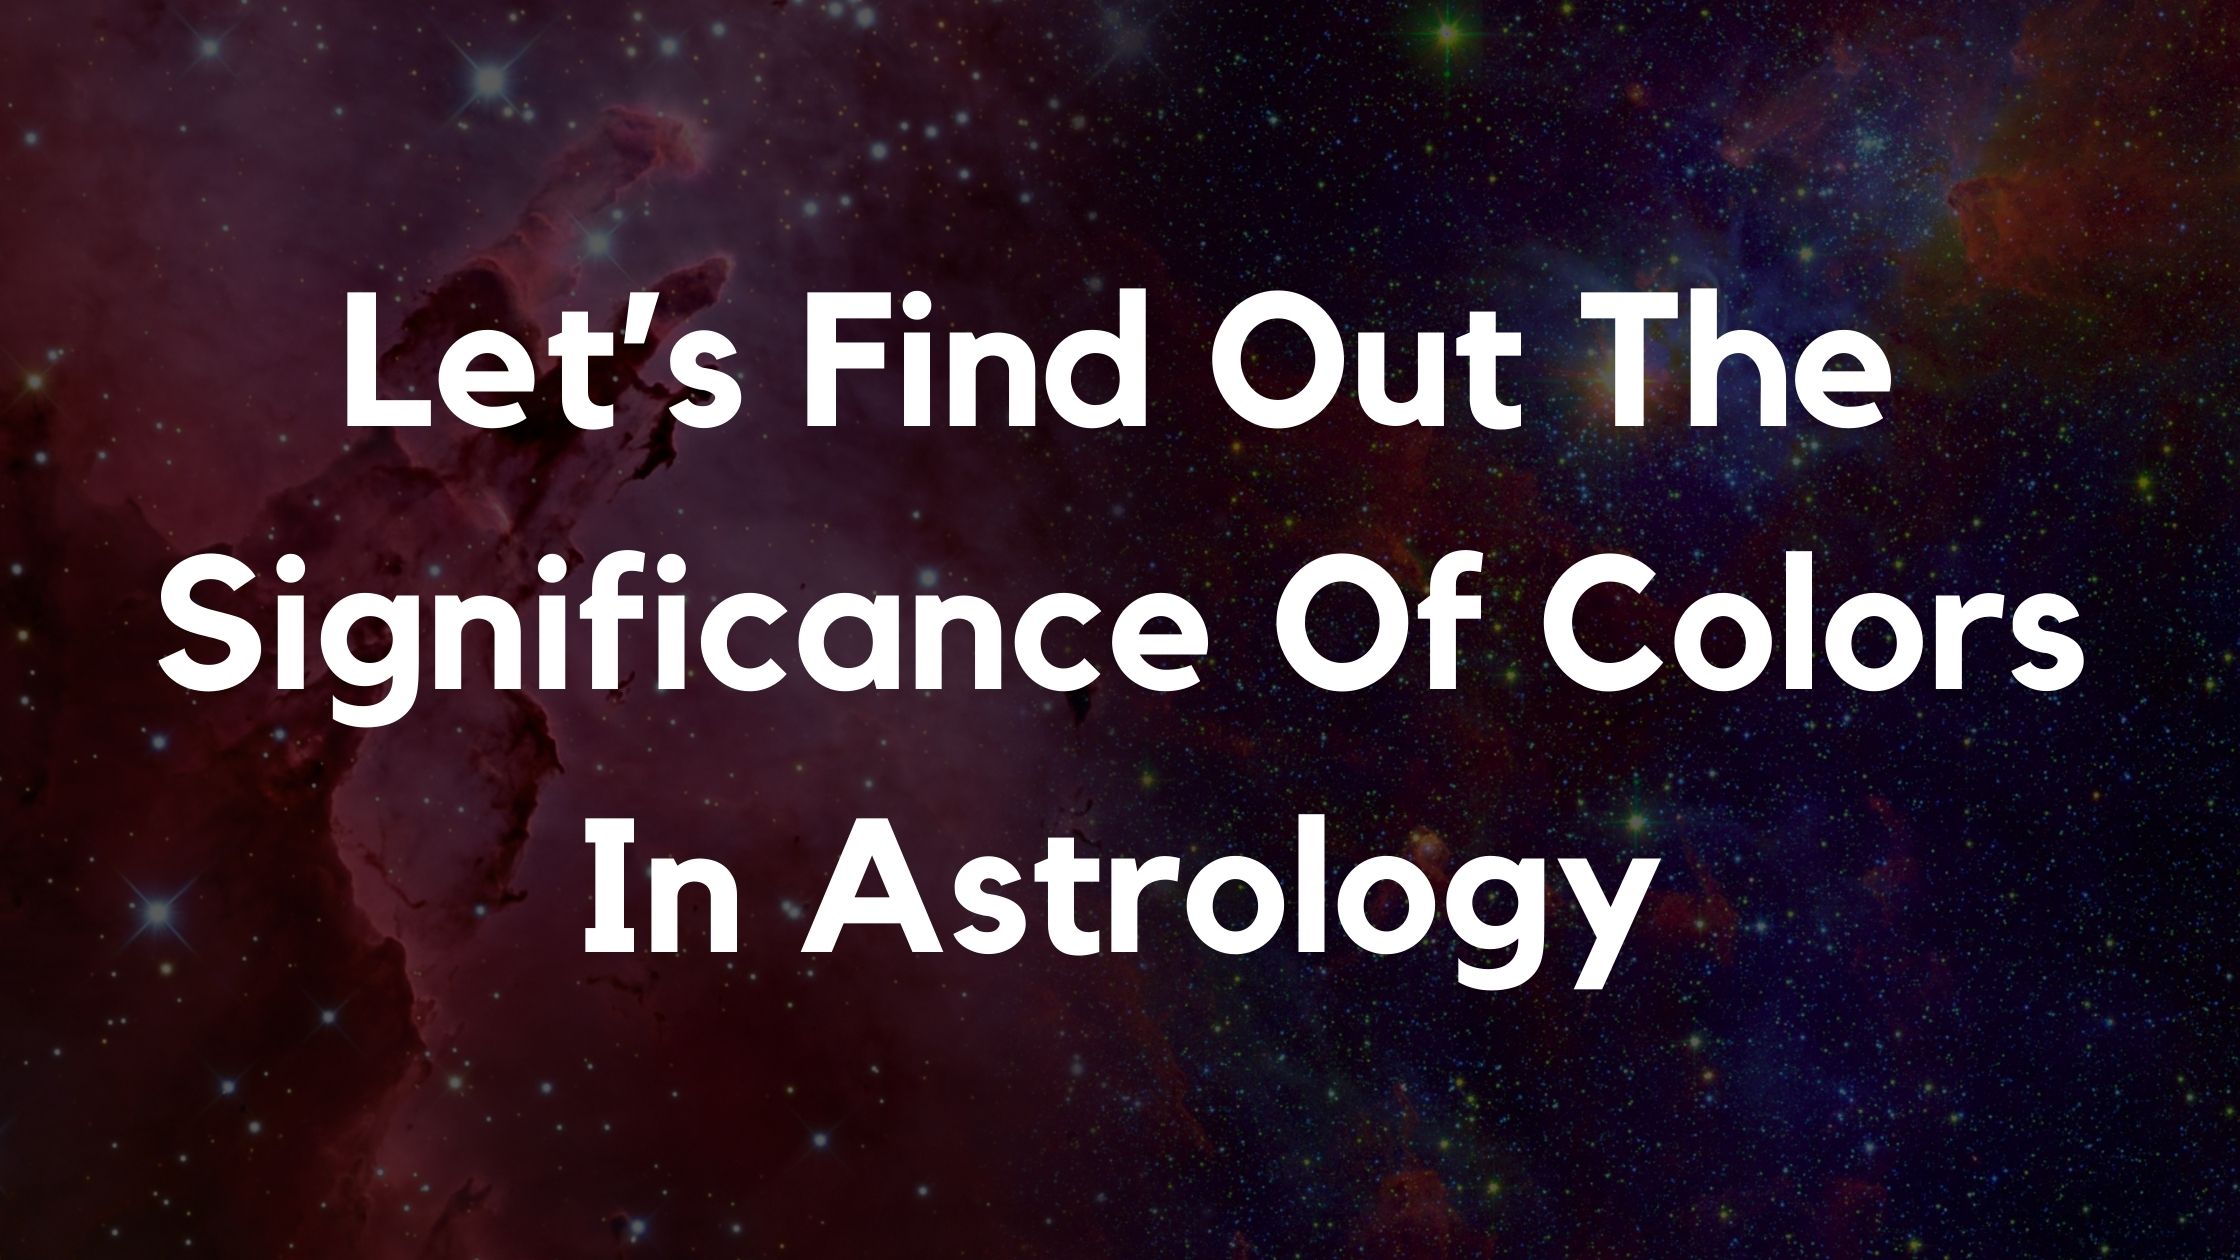 Let’s Find Out The Significance Of Colors In Astrology